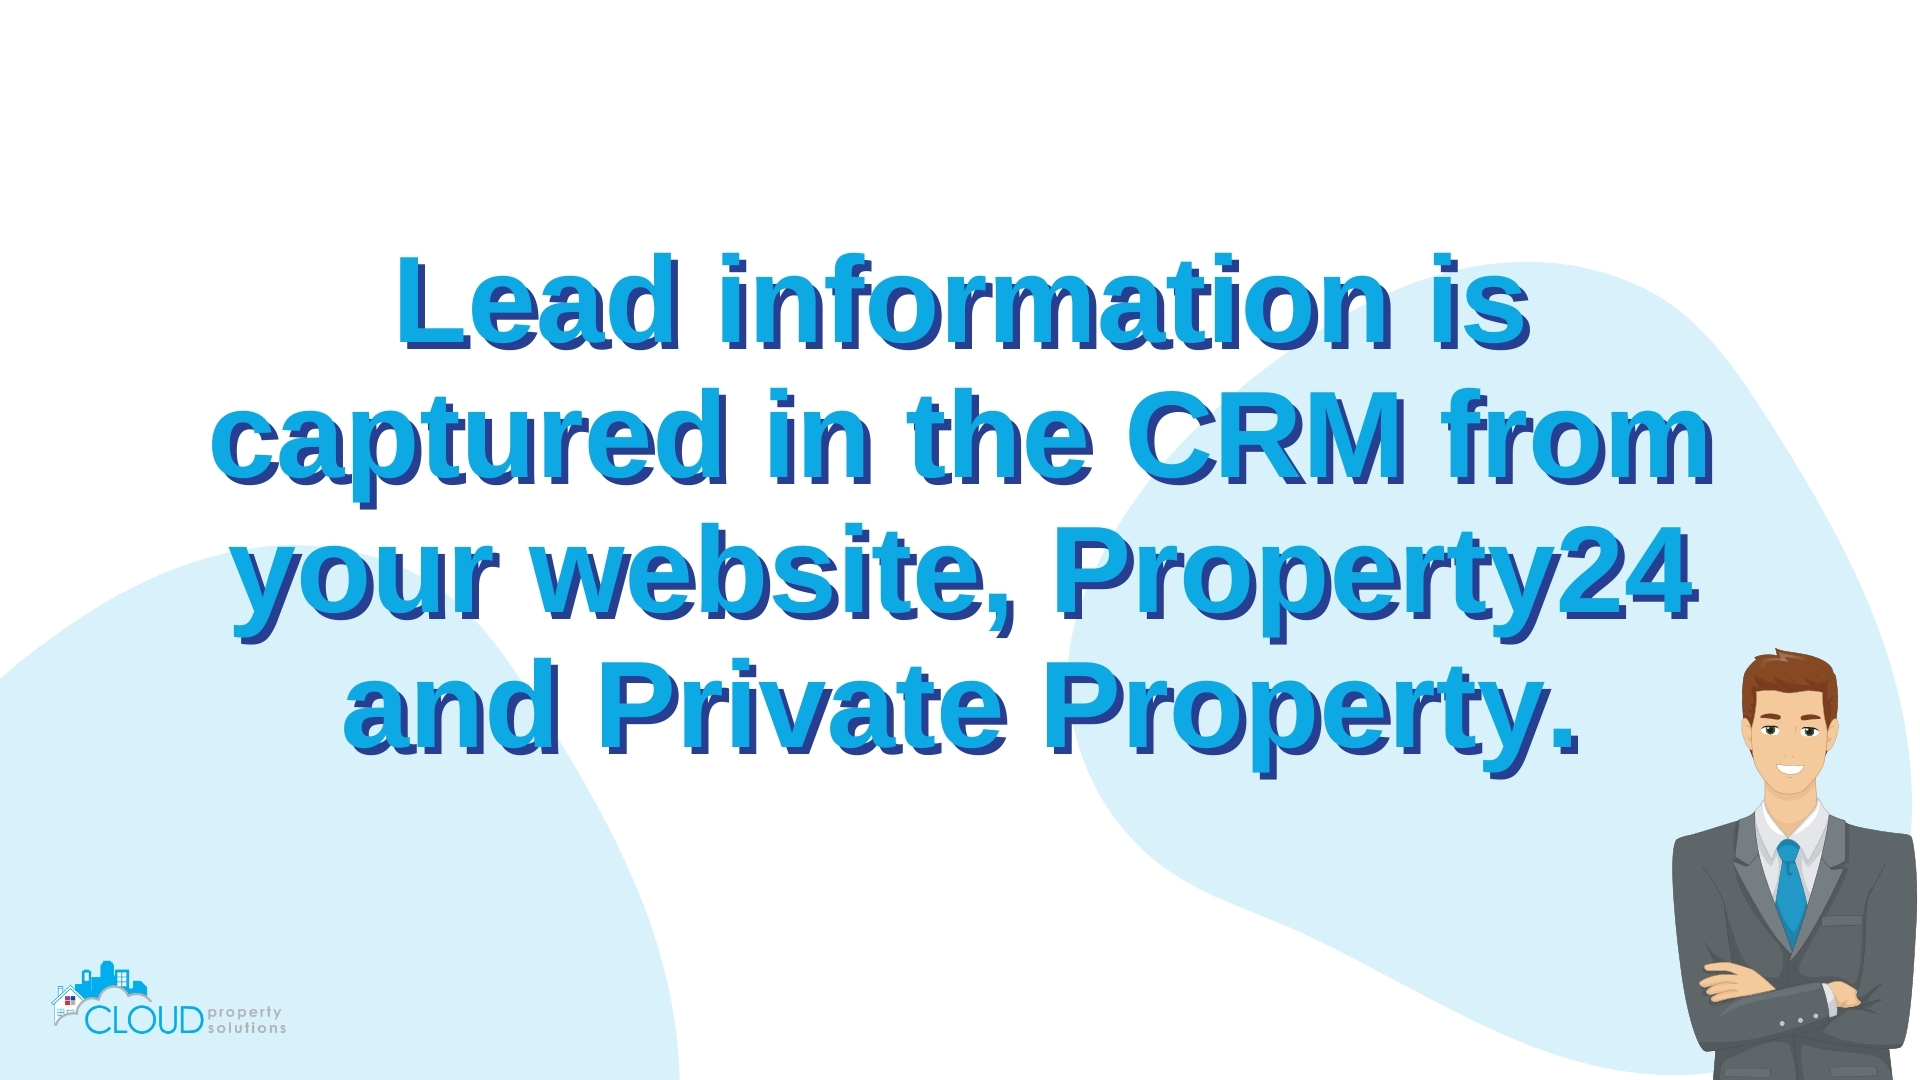 Enquiries from your website, Property24 and Private Property are automatically captured.